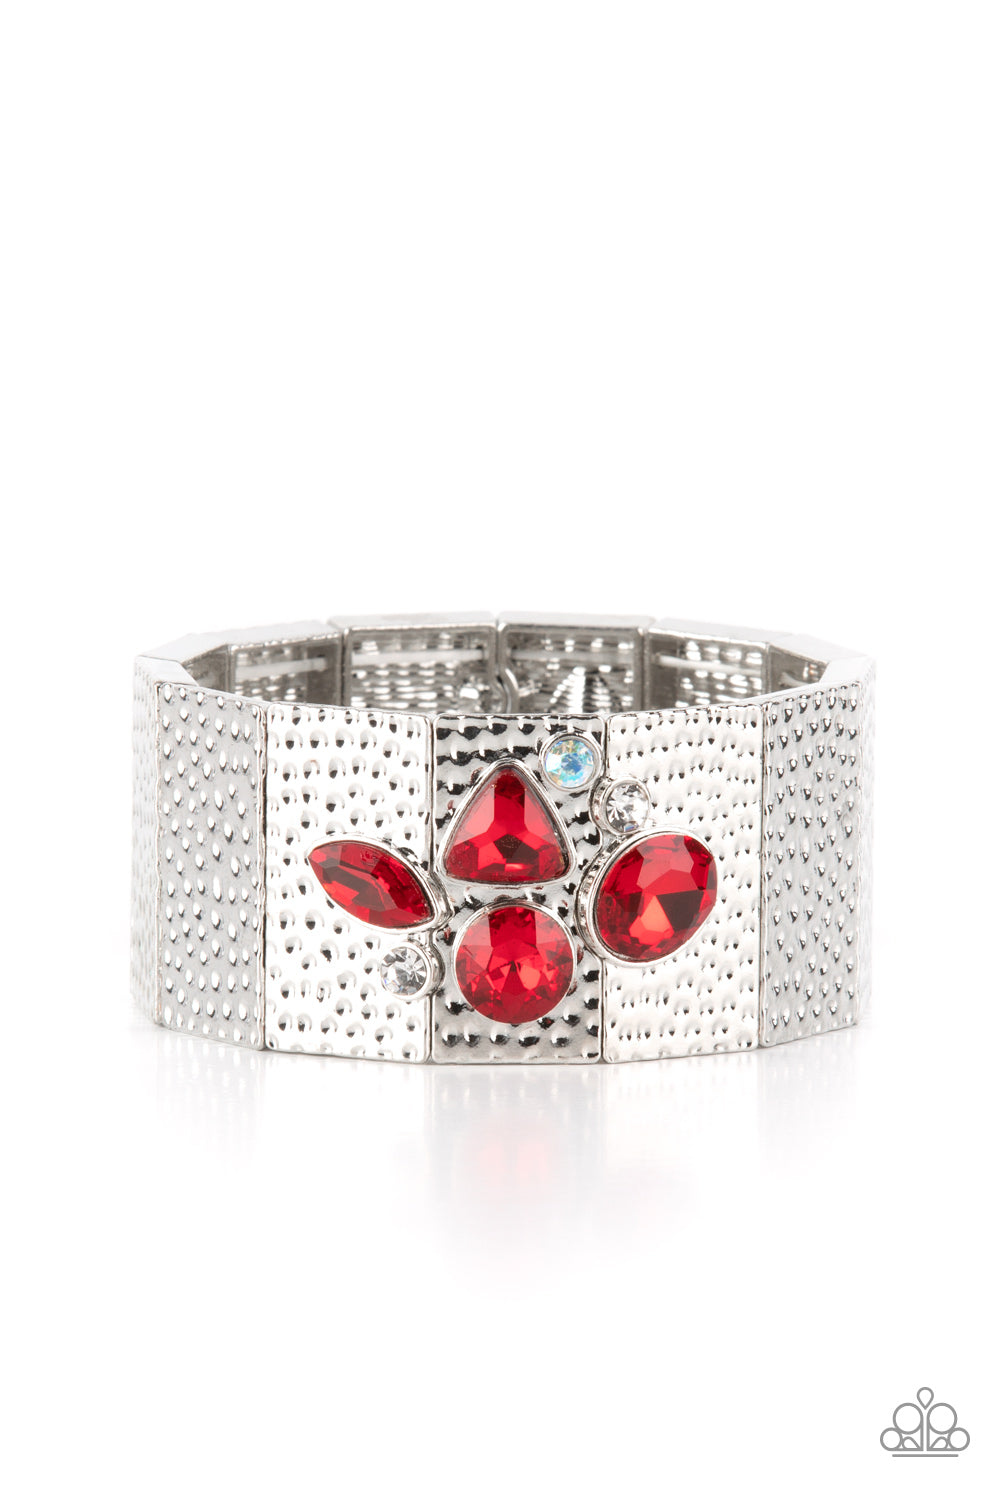 Flickering Fortune - Red and Silver Bracelet - Paparazzi Accessories - Hammered in gritty shimmer, rustic, rectangular, silver frames are threaded along stretchy bands that wrap around the wrist. Mismatched white, iridescent, and red rhinestones cluster on the front and back of the piece, creating dueling centerpieces. Sold as one individual bracelet.